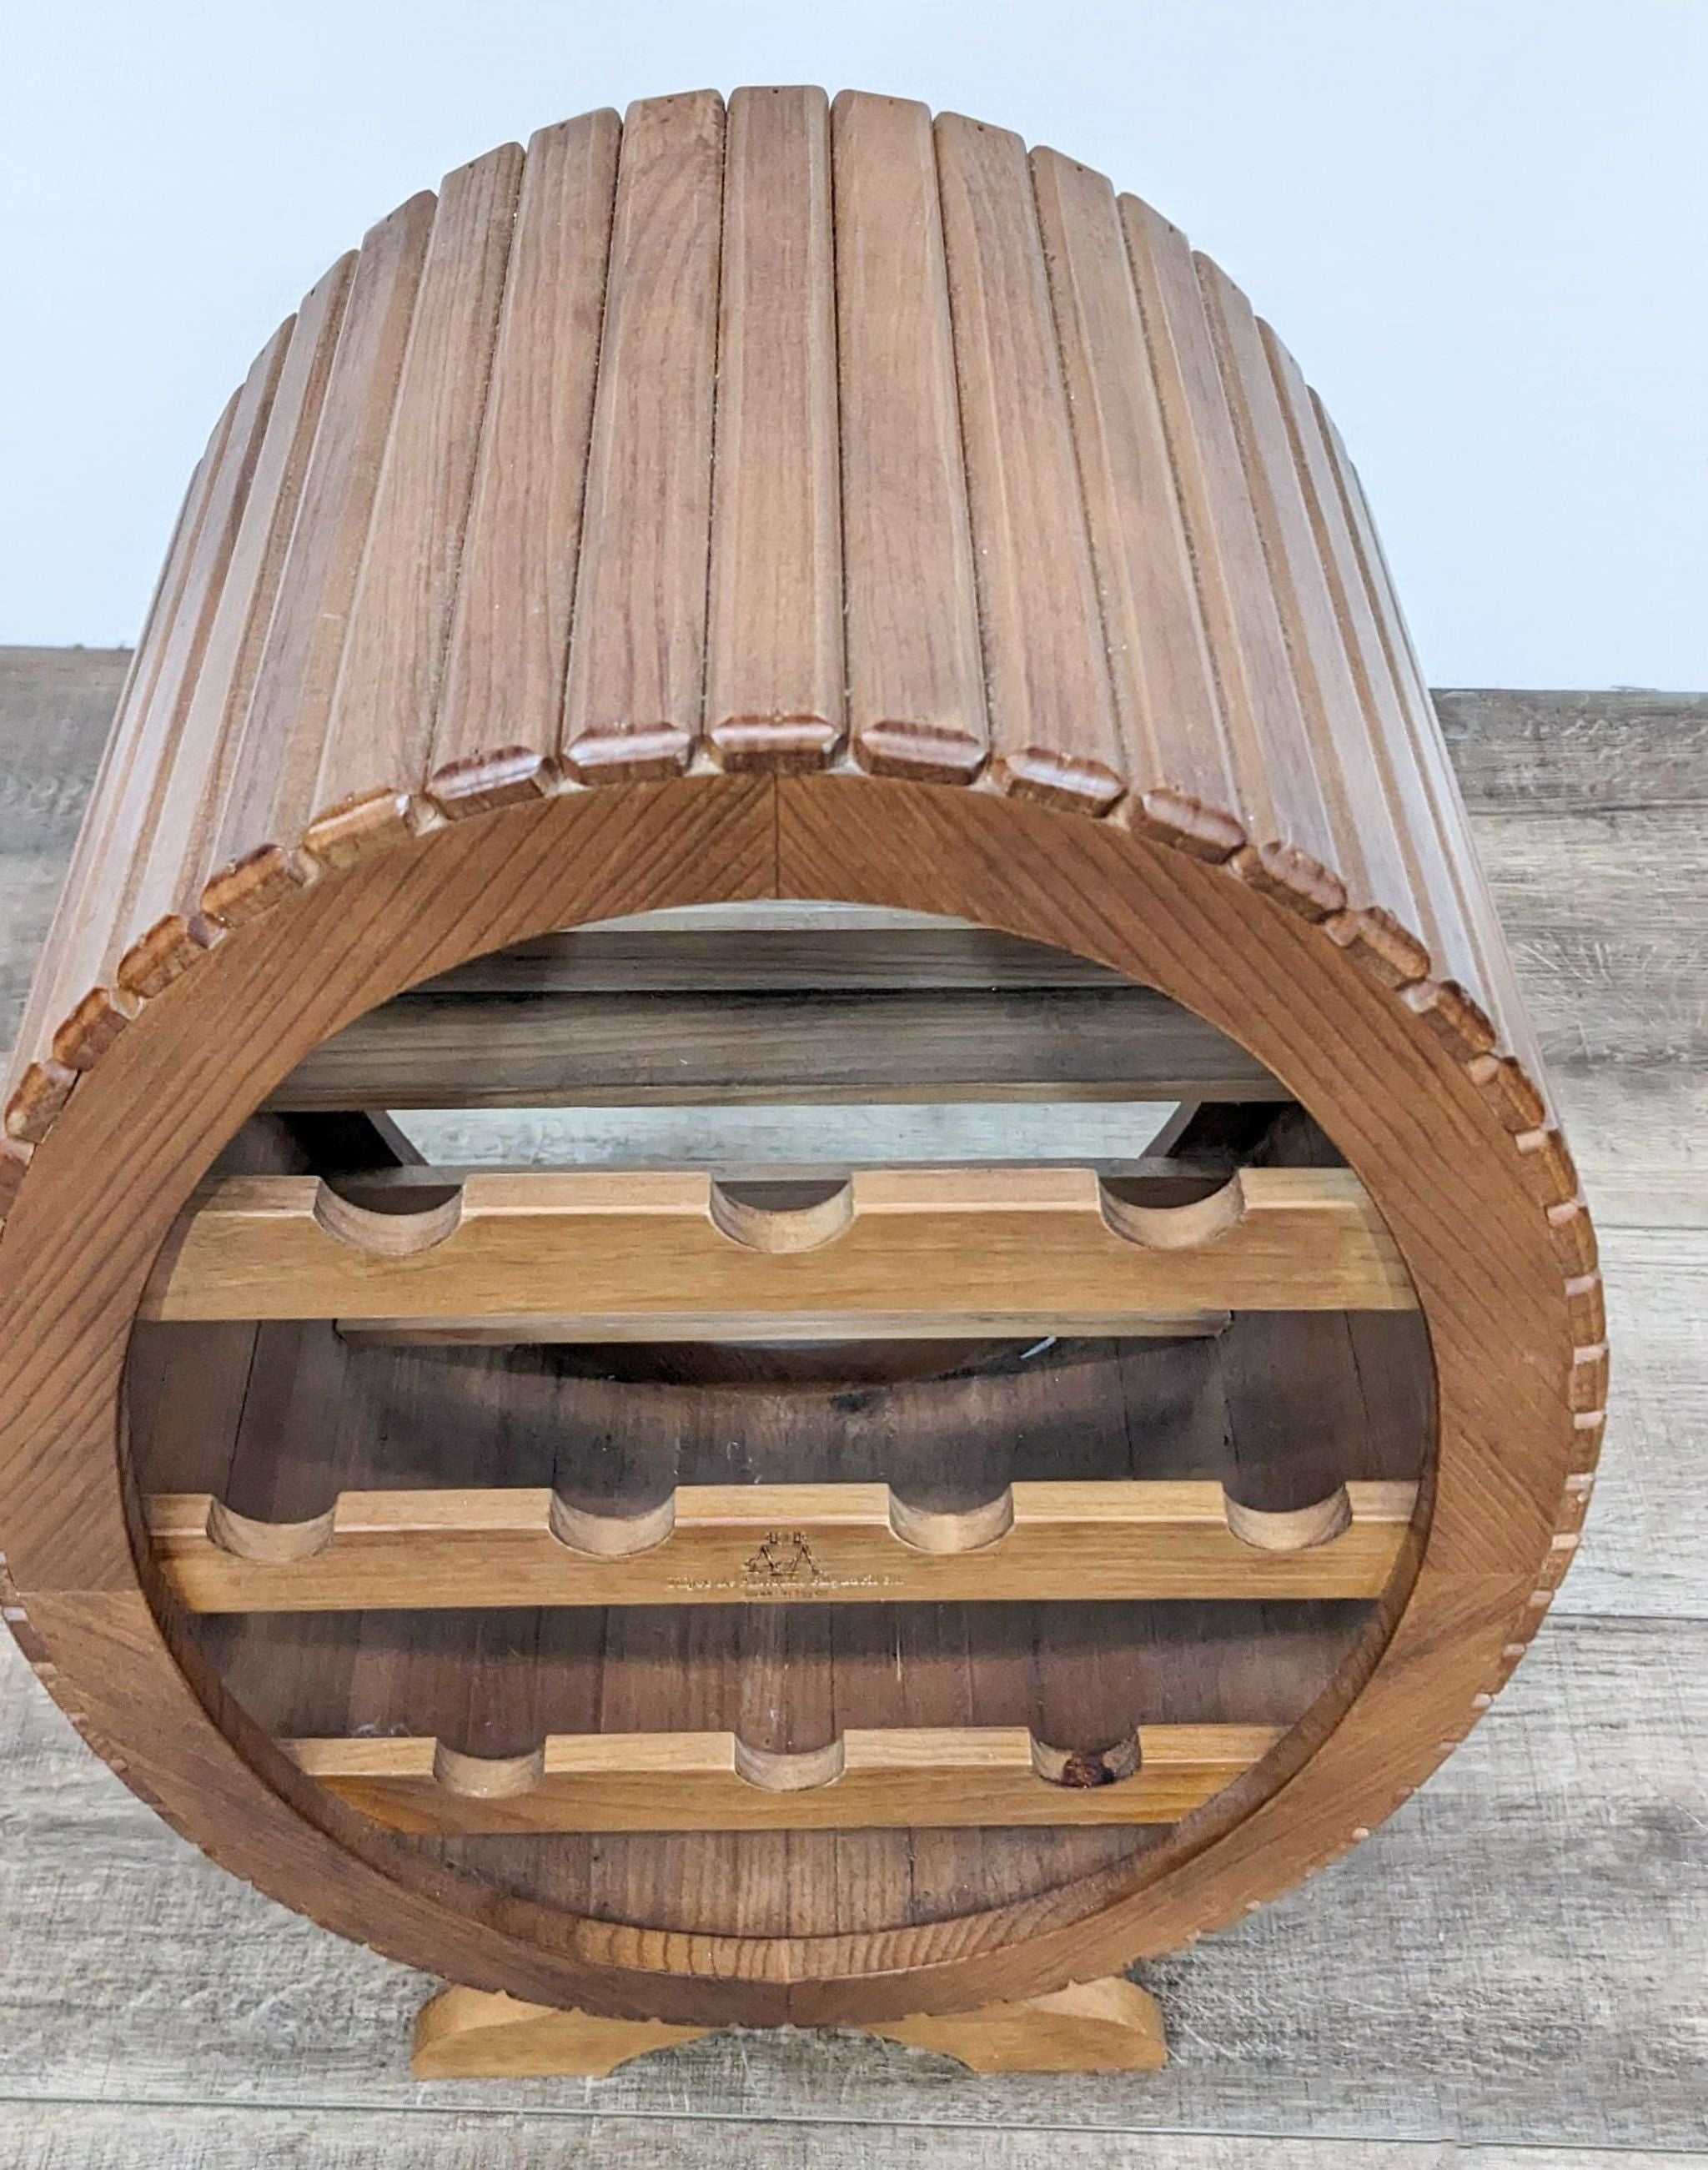 Alt text 3: Side view of a wooden barrel wine rack by Repech, showcasing its curved design and spaces for wine bottle storage.